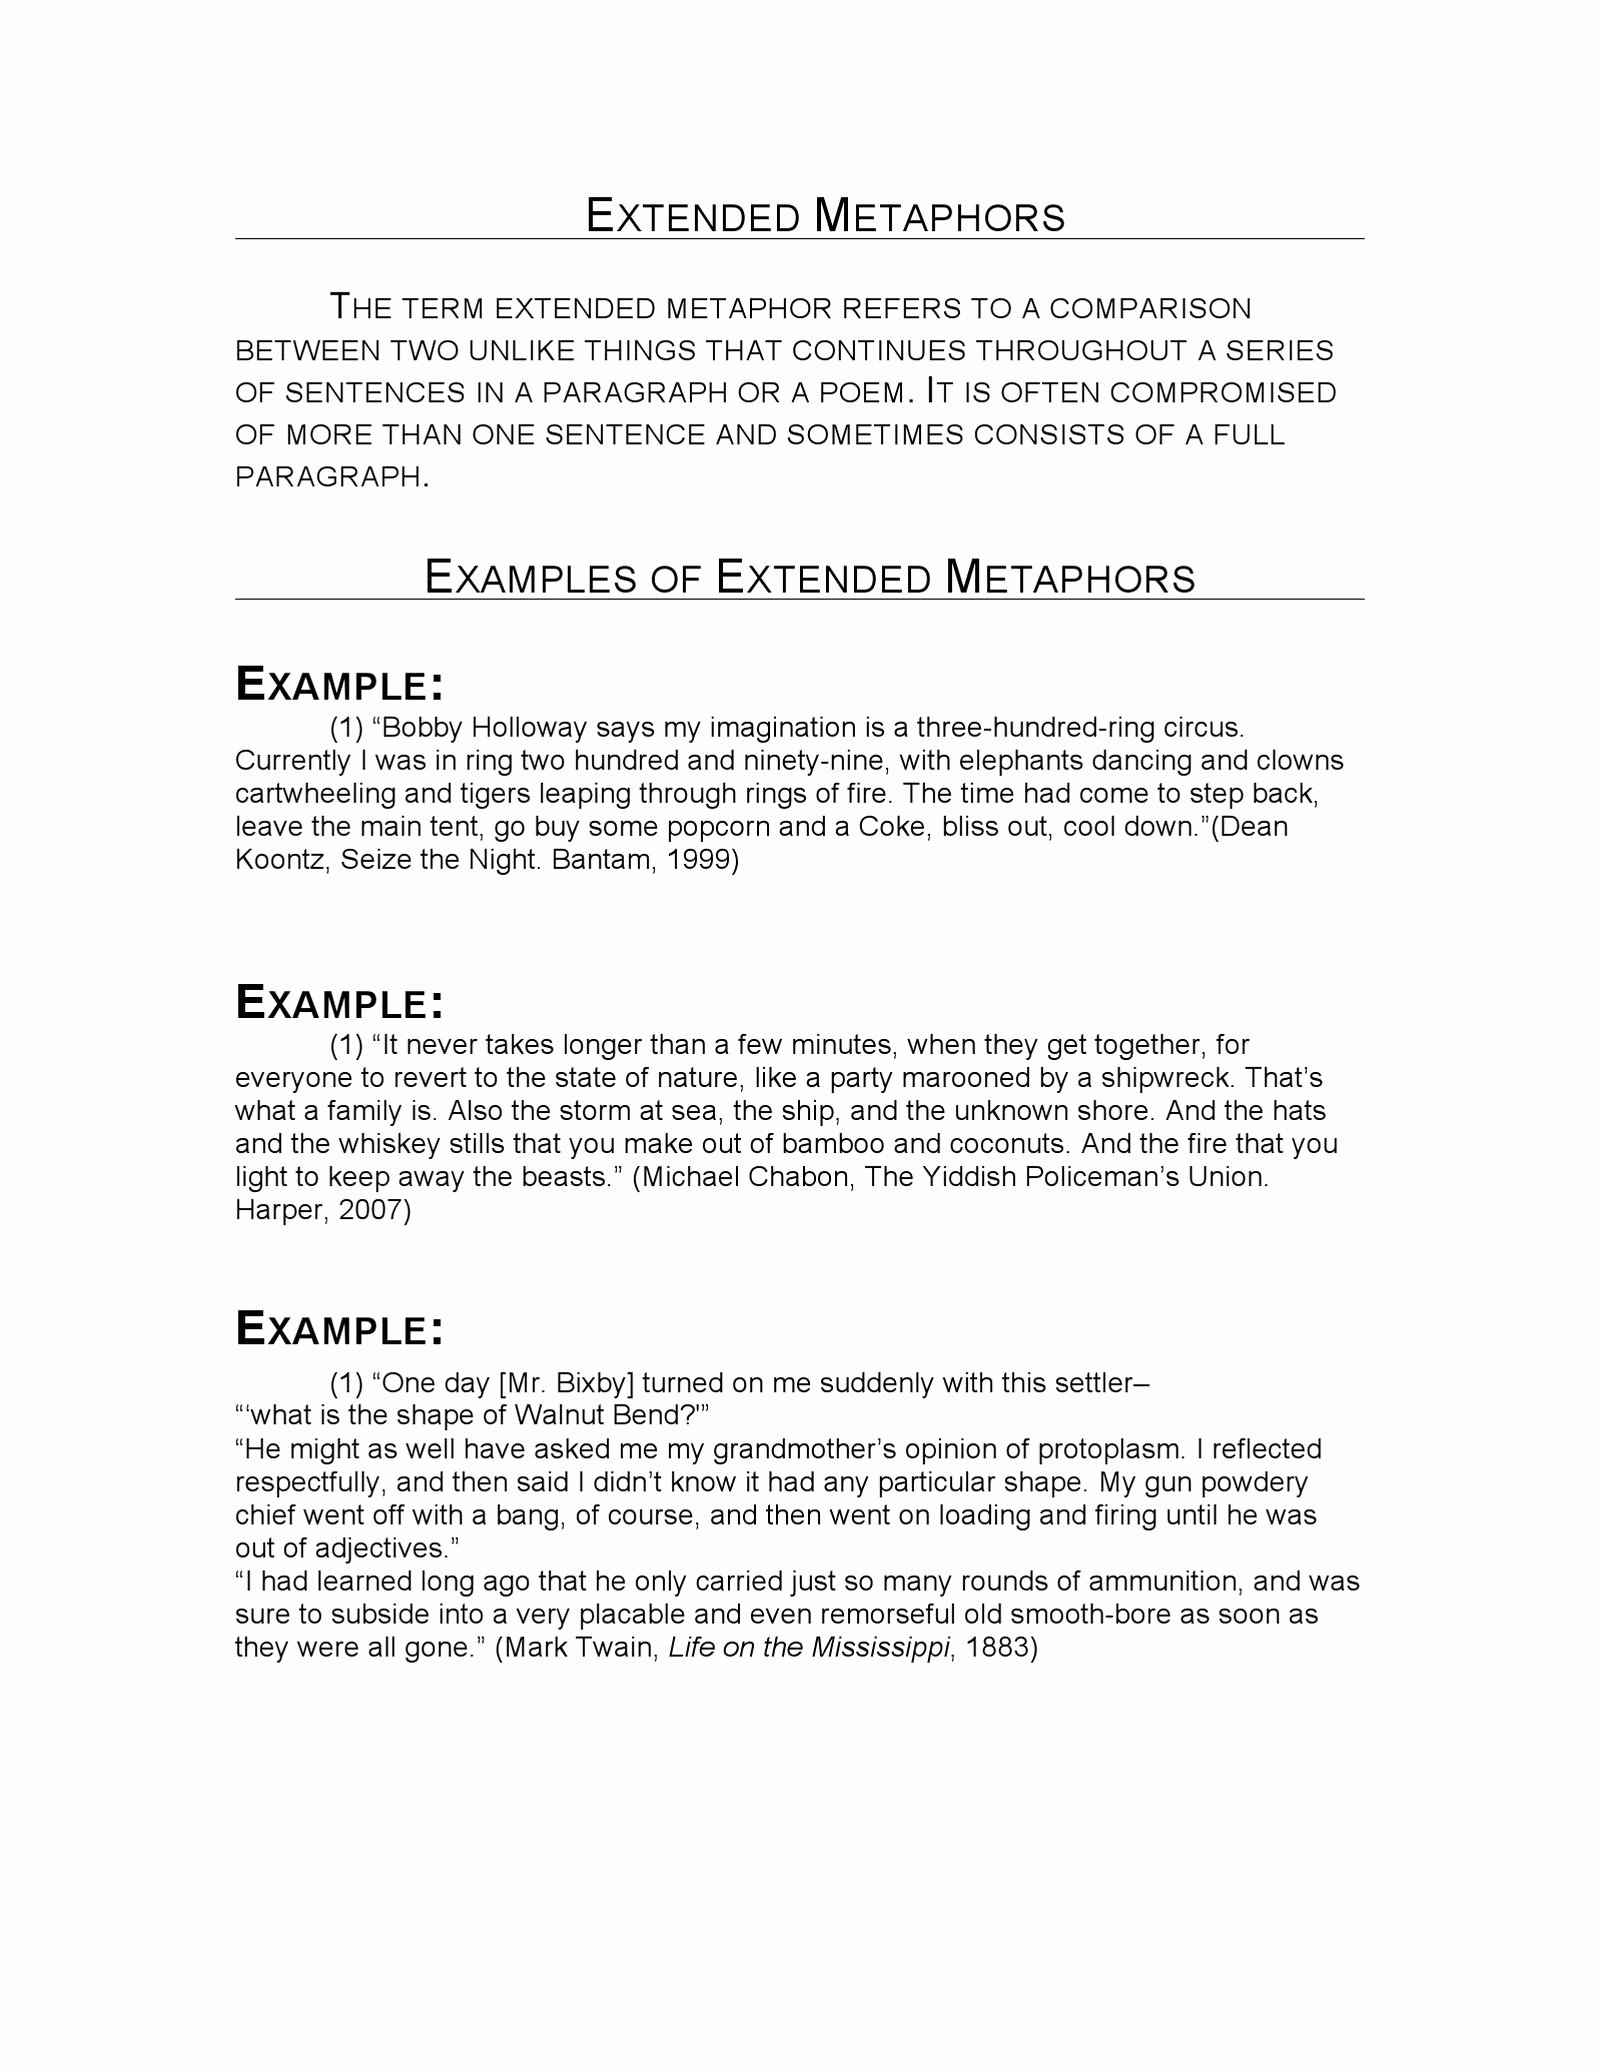 Wgu Lesson Plan Template Inspirational Examples Poems with Extended Metaphors Wallpaperall